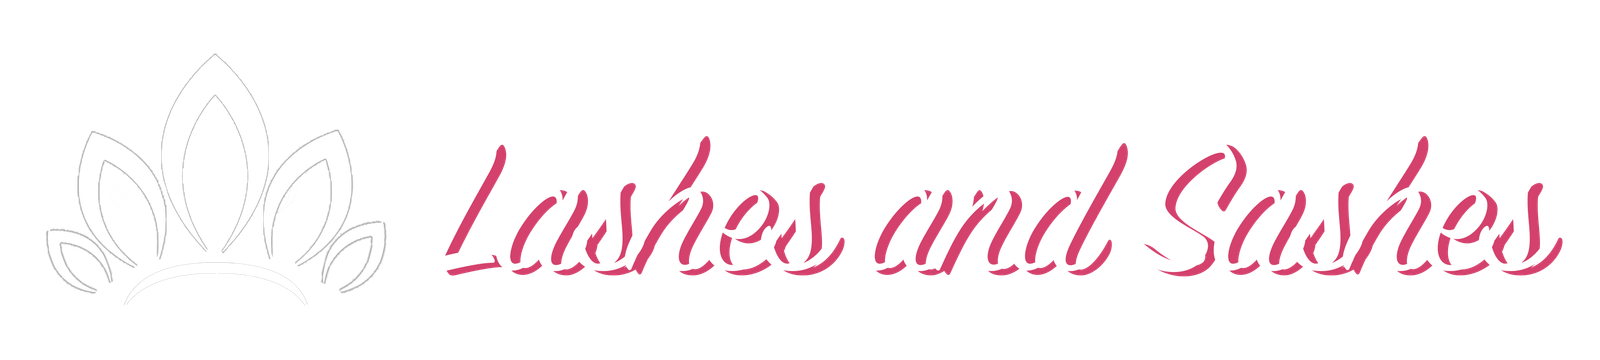 Lashes and Sashes Pageant Blog, Podcast, and Online Community